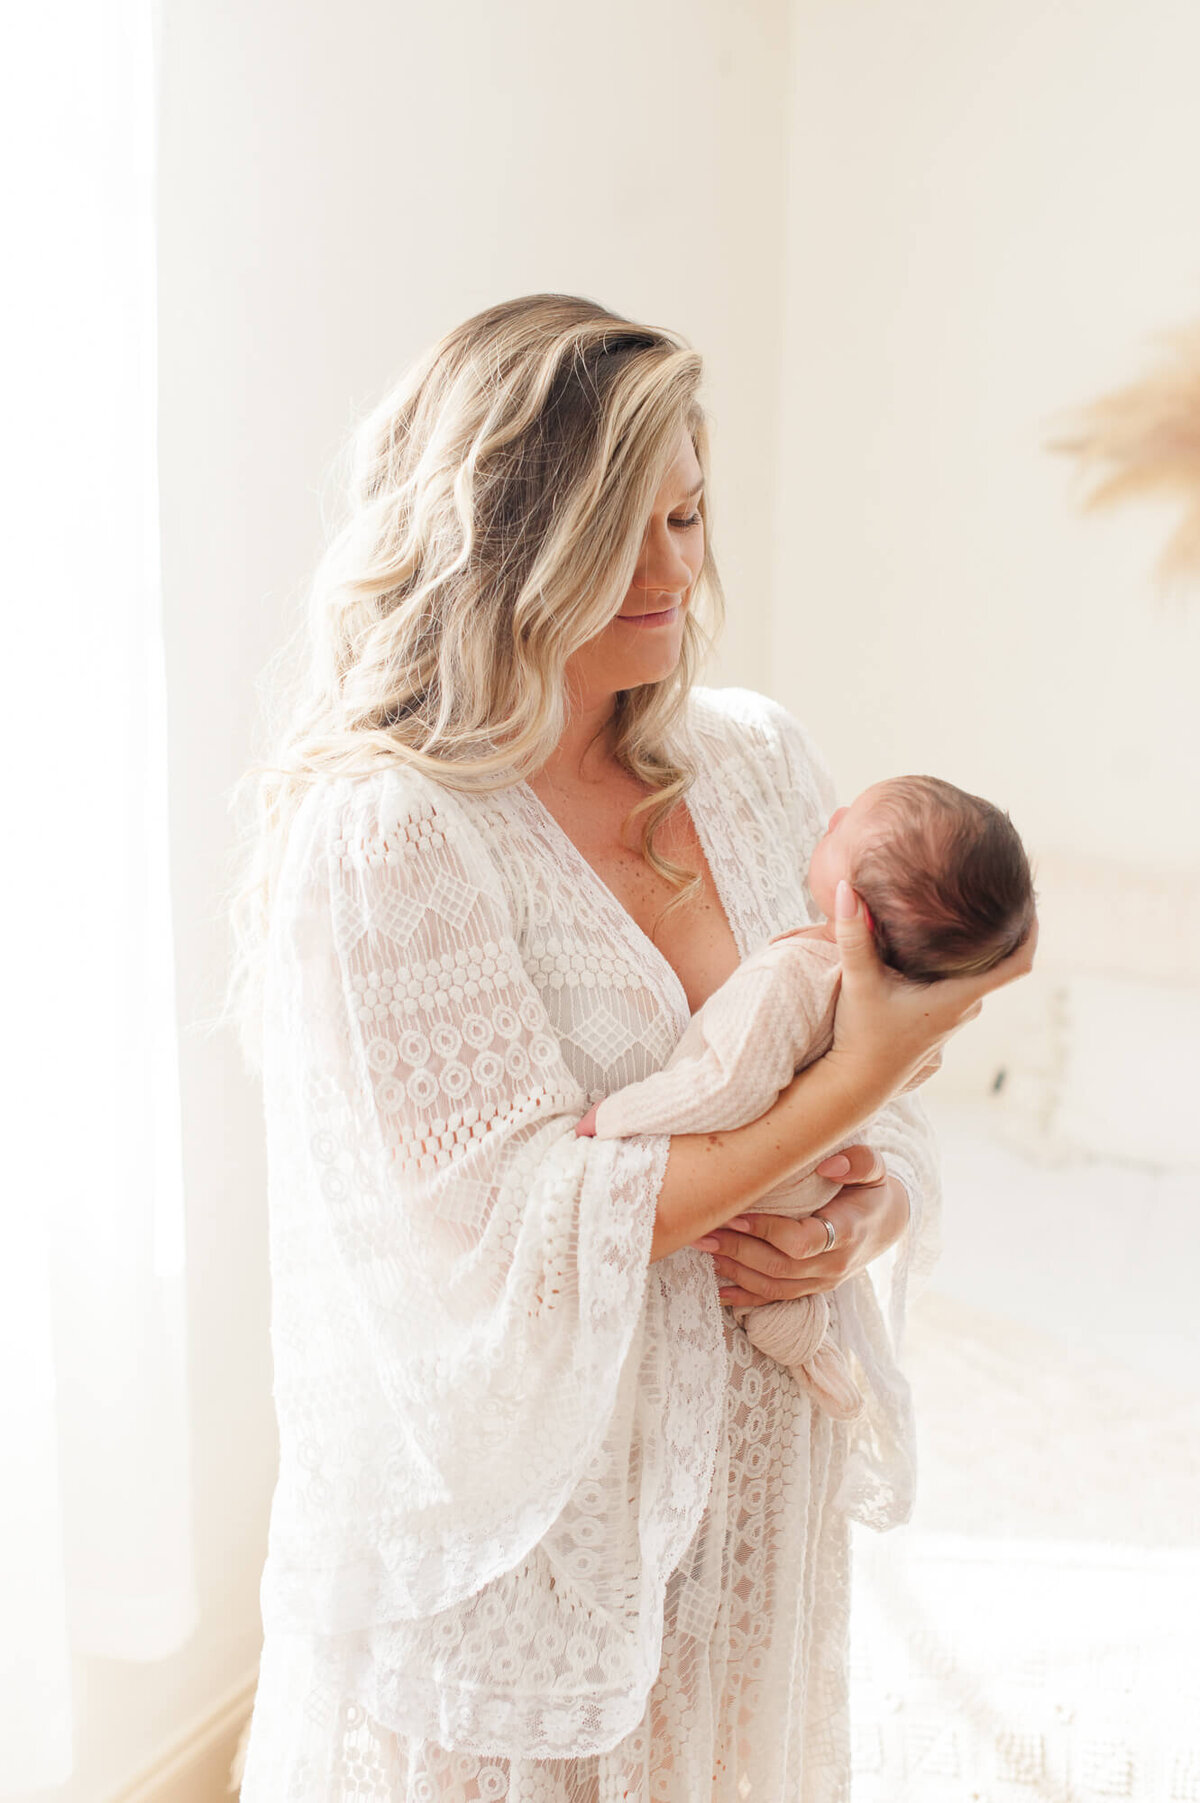 Mom holding newborn baby while standing near a natural light window